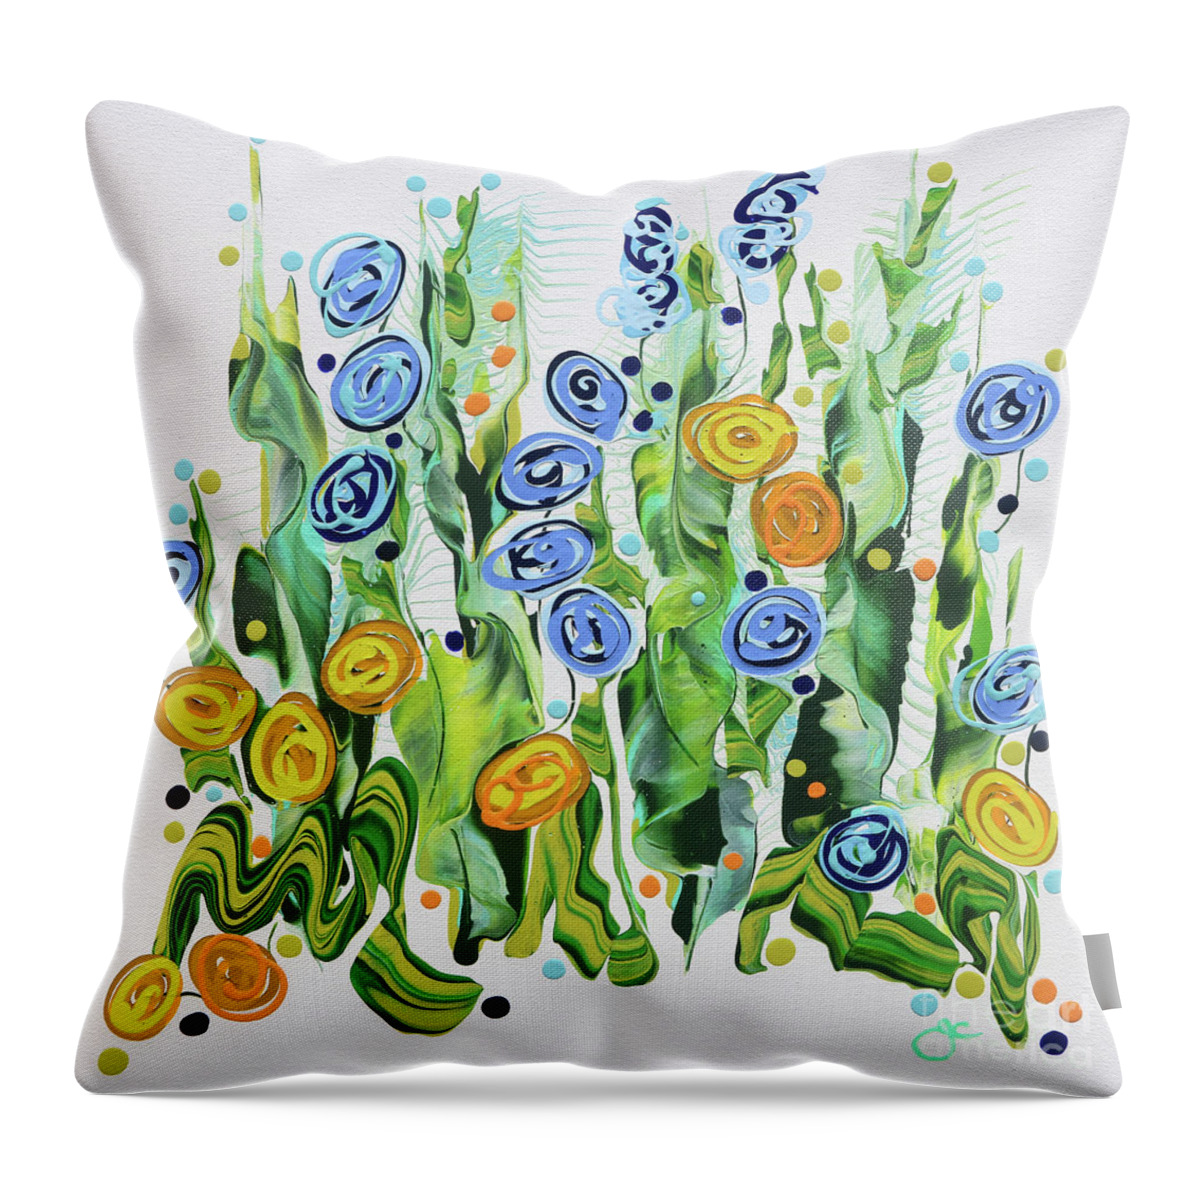  Throw Pillow featuring the painting Summertime by Jane Crabtree